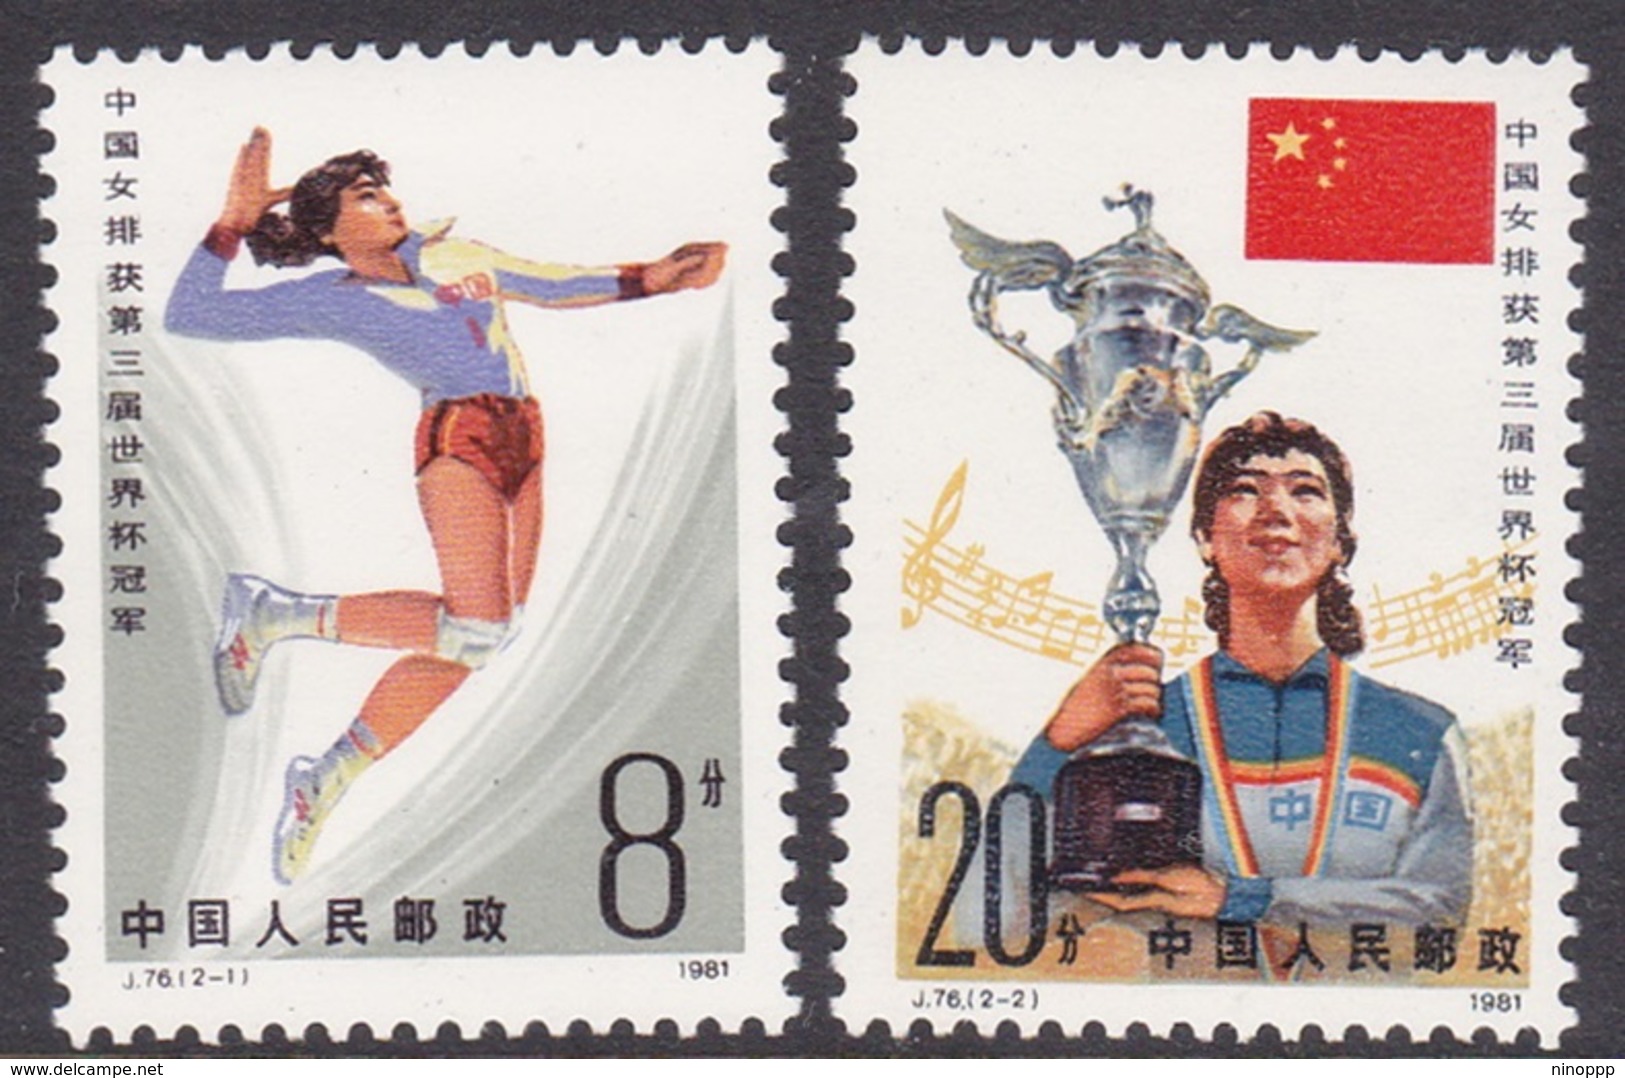 China People's Republic SG 3081-83 1981 Women's Team Victory In 3rd World Cup Volleyball Championship, Mint Never Hinged - Ongebruikt